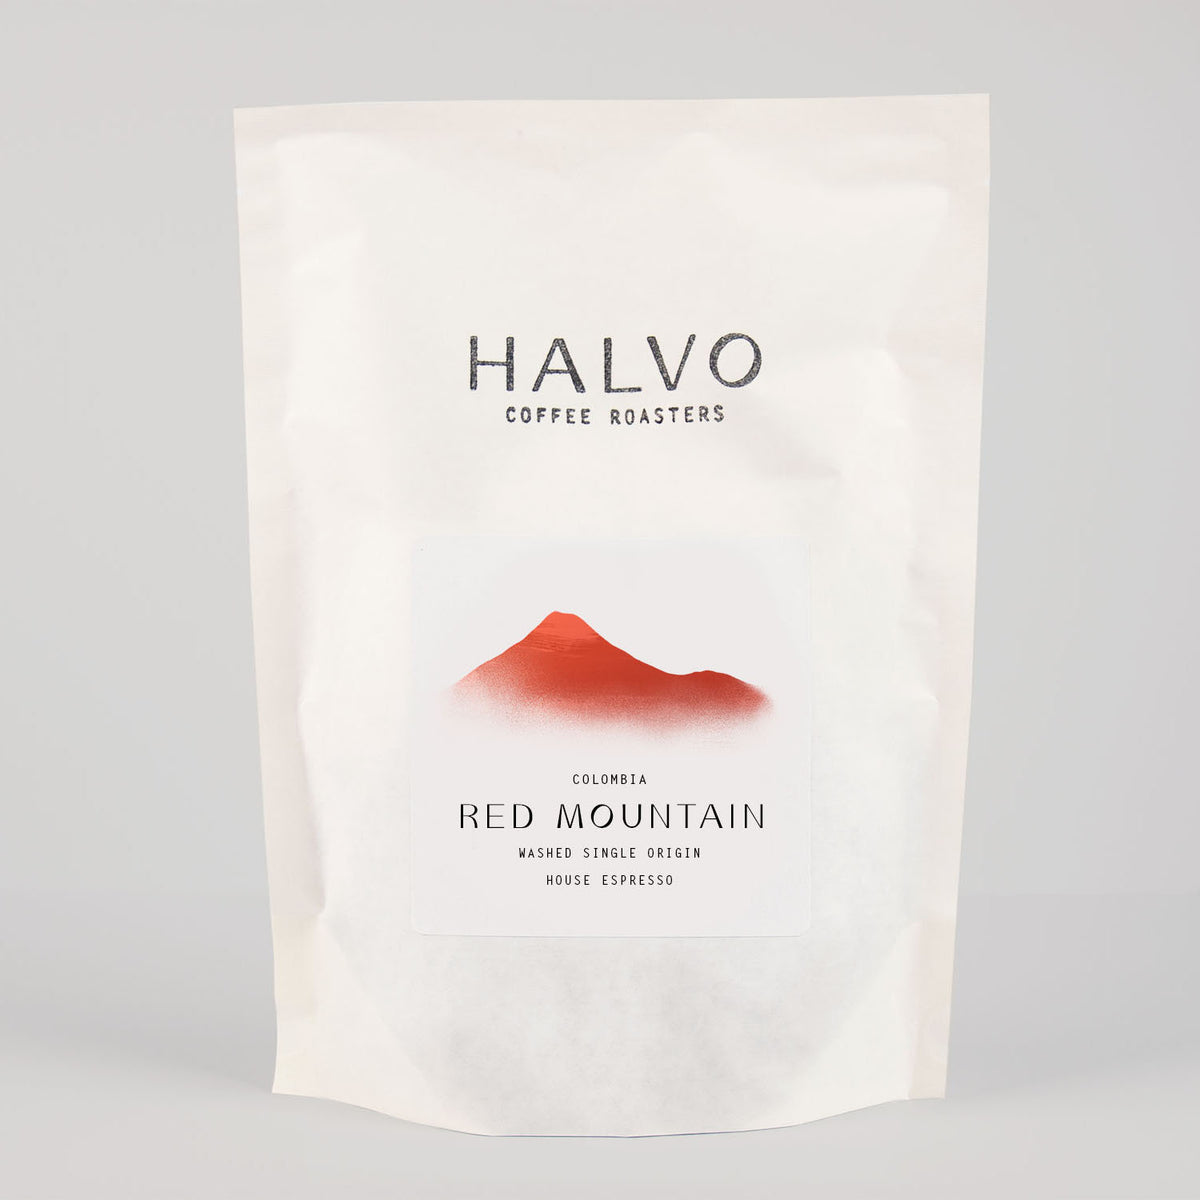 At opdage Søjle Finde sig i Red Mountain - Colombia | Halvo Coffee Roasters